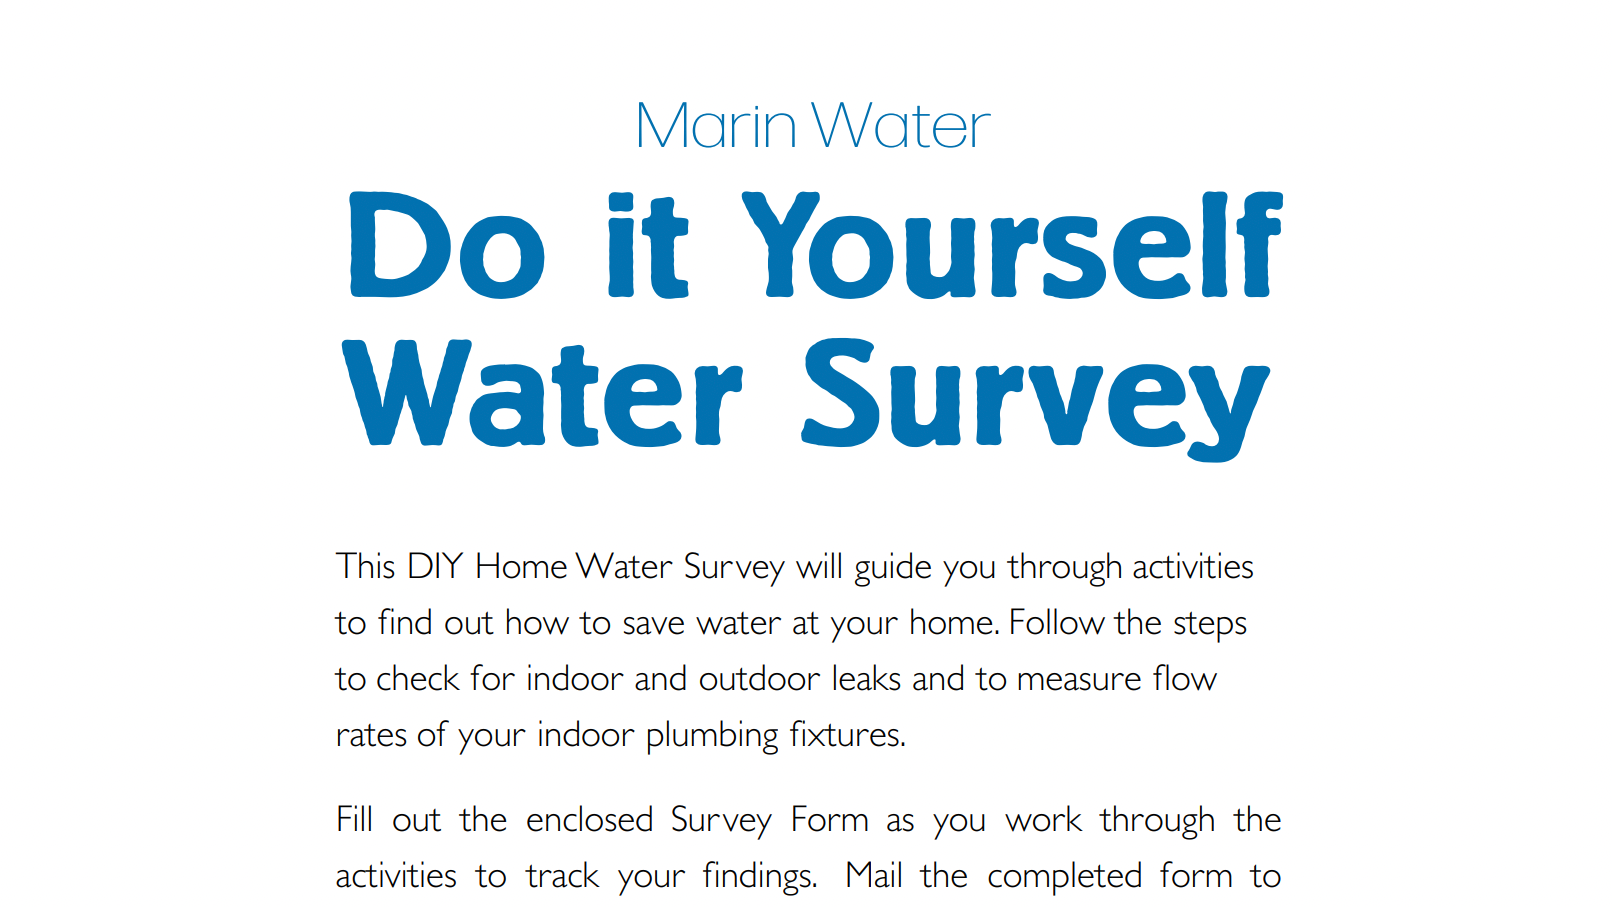 Thumbnail image of Do it Yourself Water Survey document